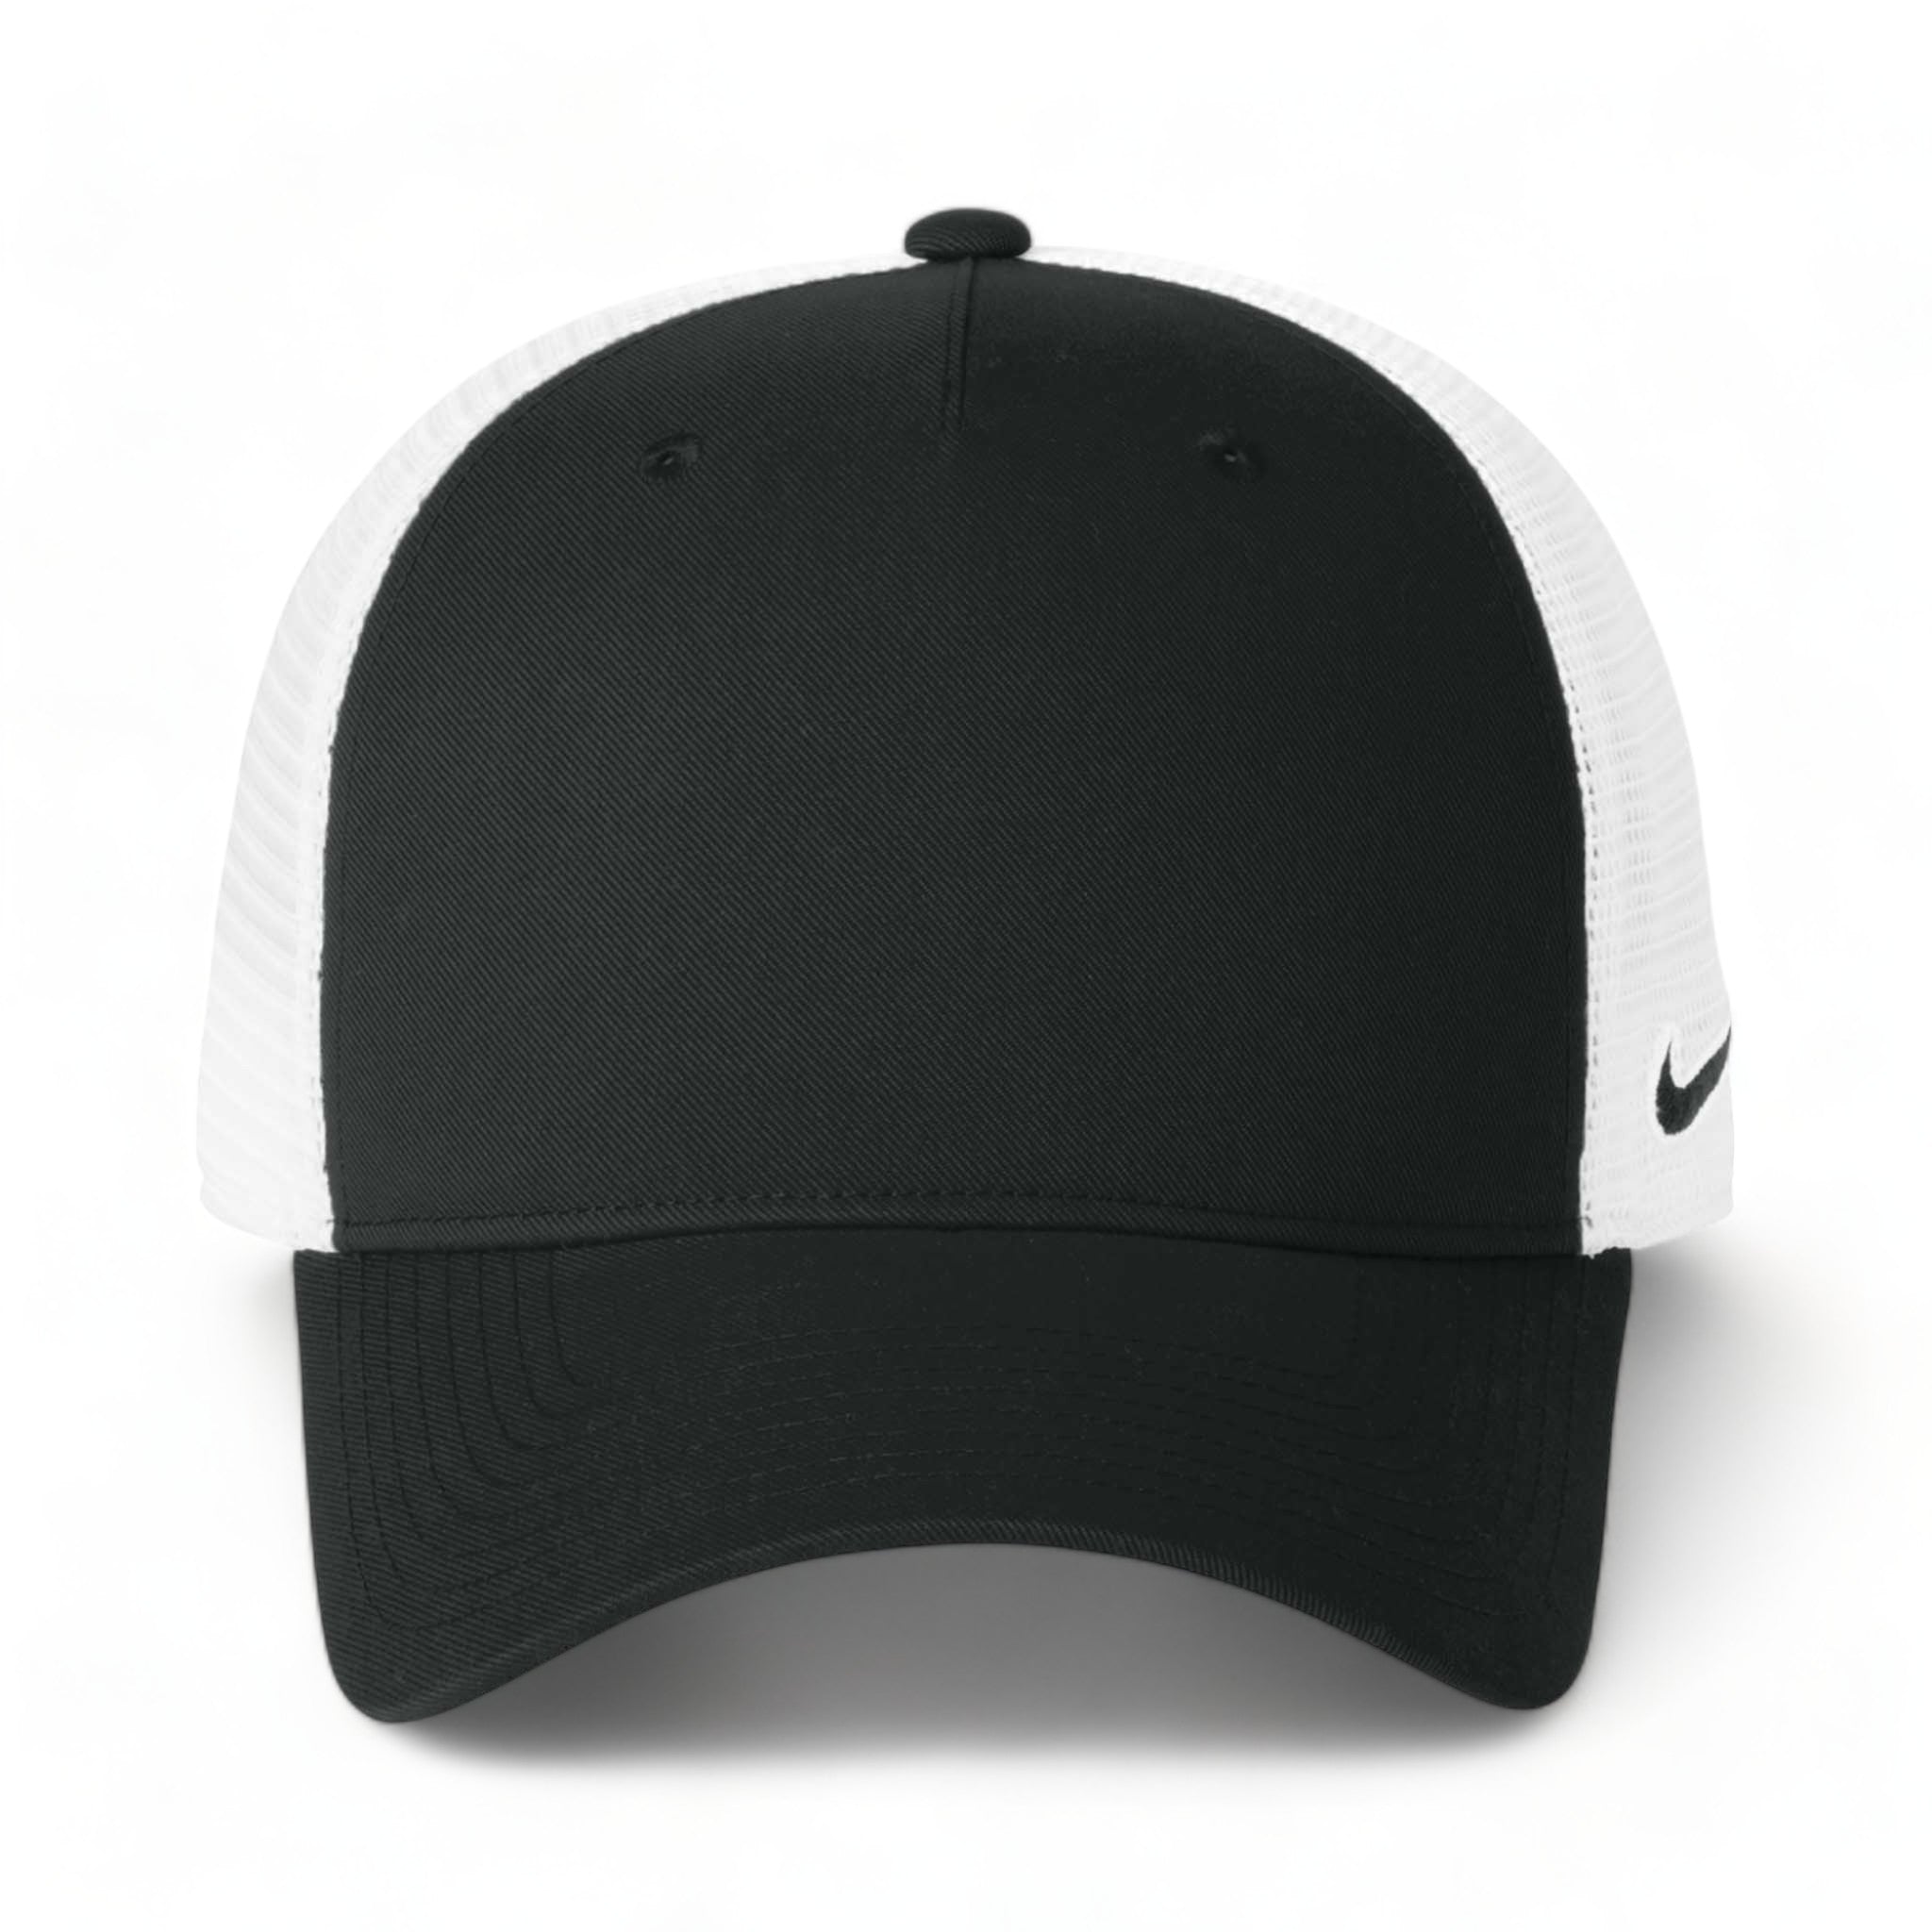 Front view of Nike NKFN9893 custom hat in black and white